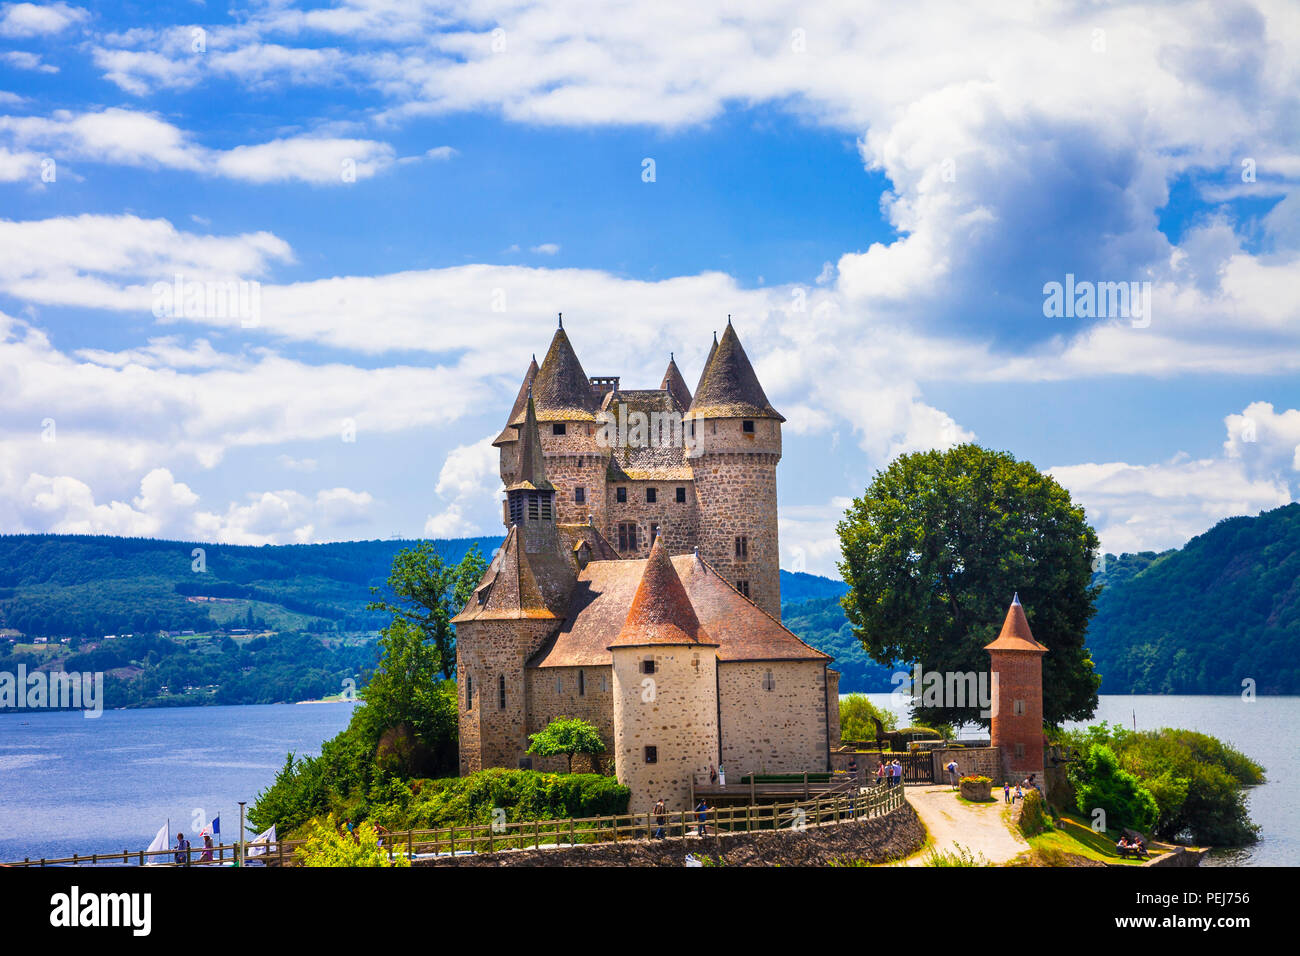 Landmark of France,impressive Chateau de Val,view with lake. Stock Photo